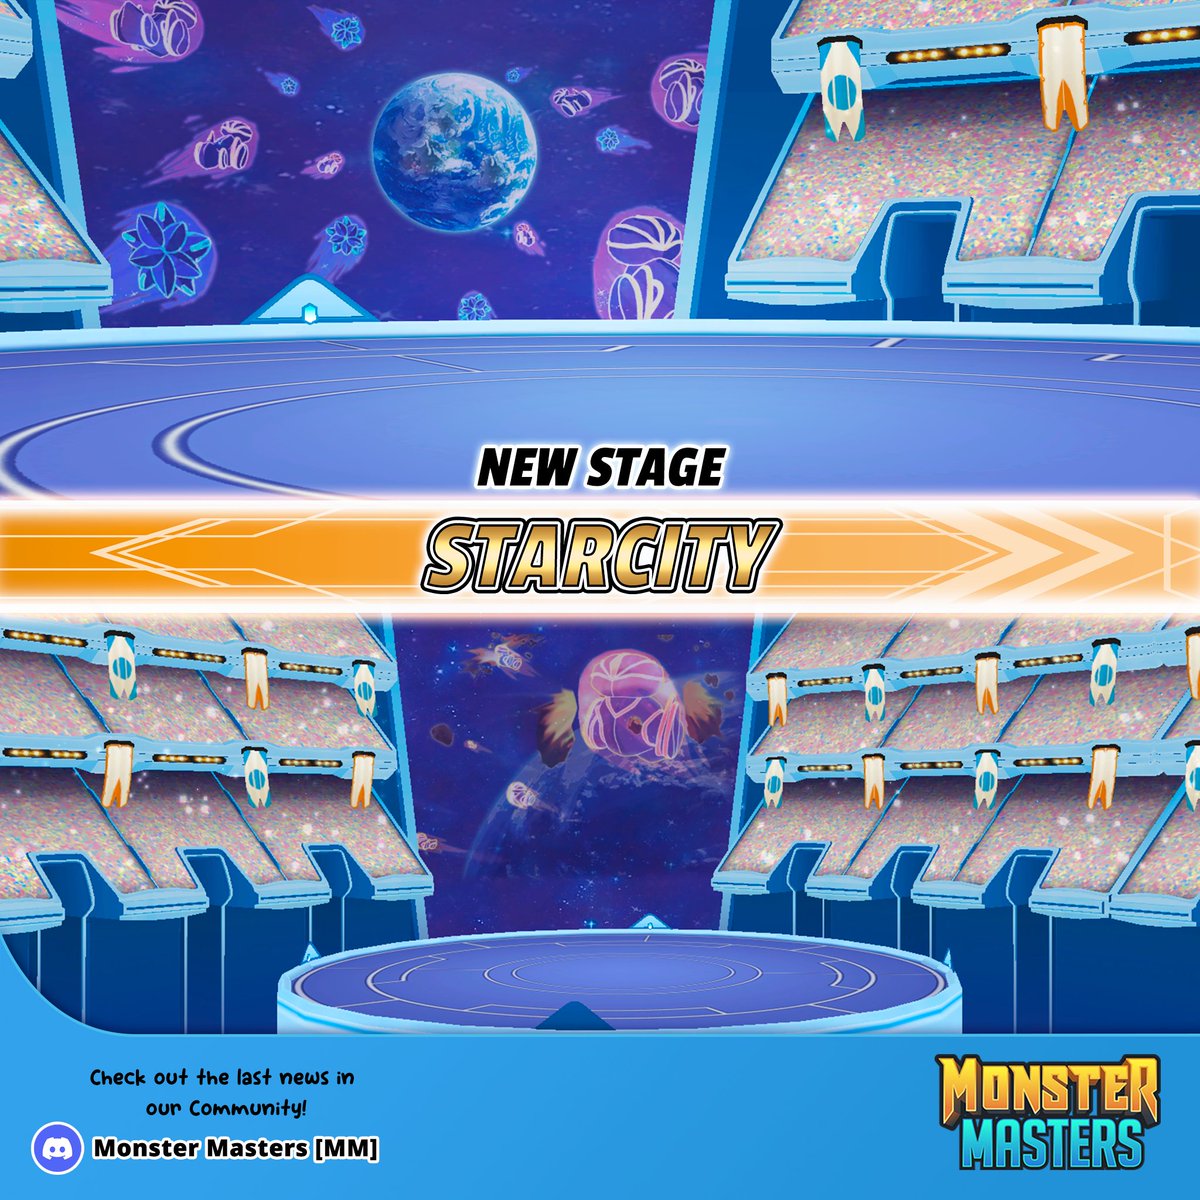 New stages coming soon to Monster Masters! Which one you like the most so far? ✨✨🤩🤩

#monstermasters #mobilegames #anime #fakemon #pokemon #gaming #games #gameplay #iosgames #androidgames #freetoplay #gamedesign #indiegames #twitch #mobilegaming #monsterbattles